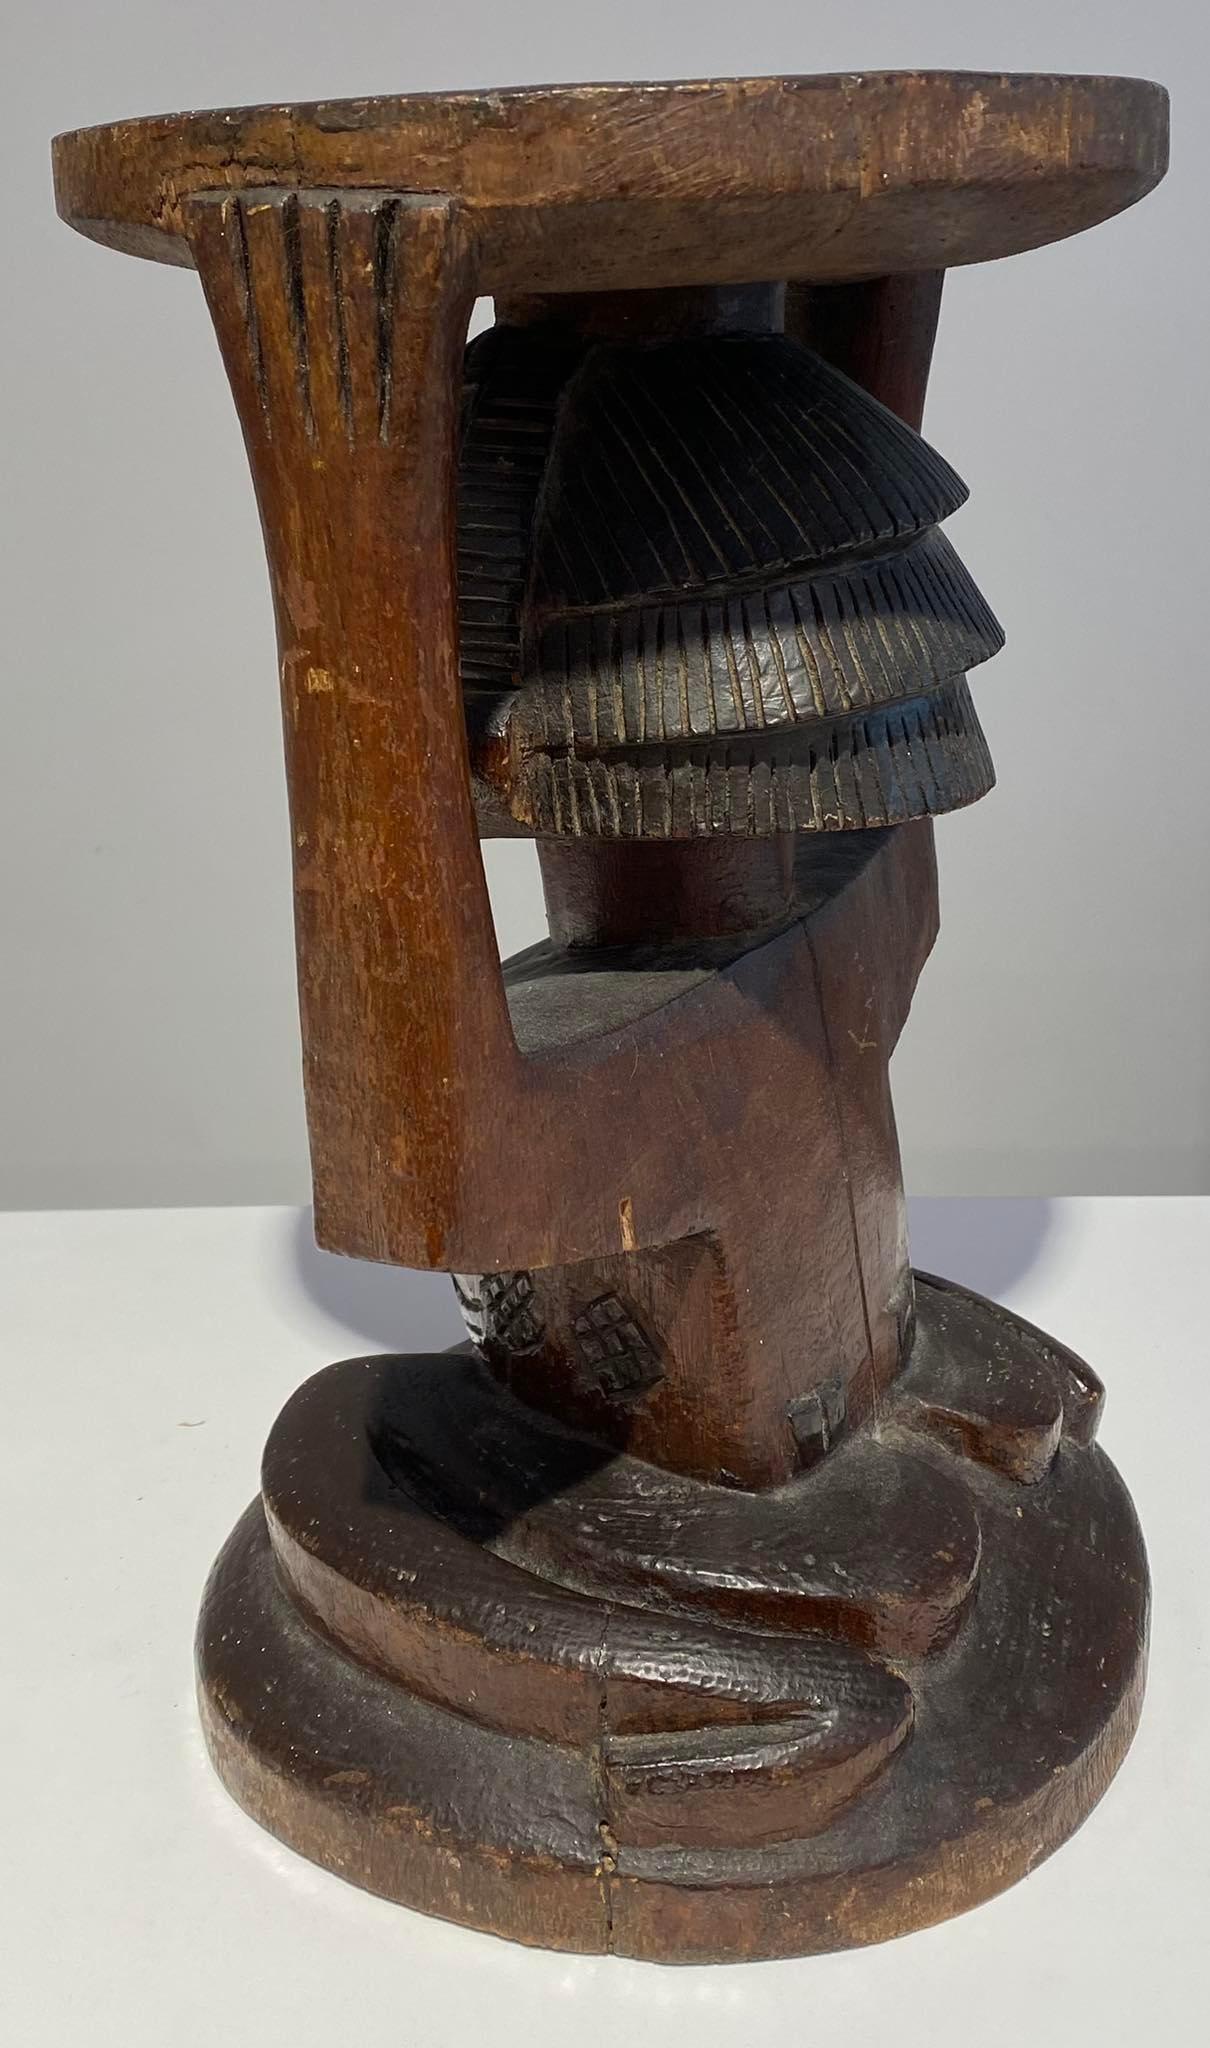 Hardwood Luba Royal antique caryatid enthronement emblem early 20th DR Congo Africa For Sale